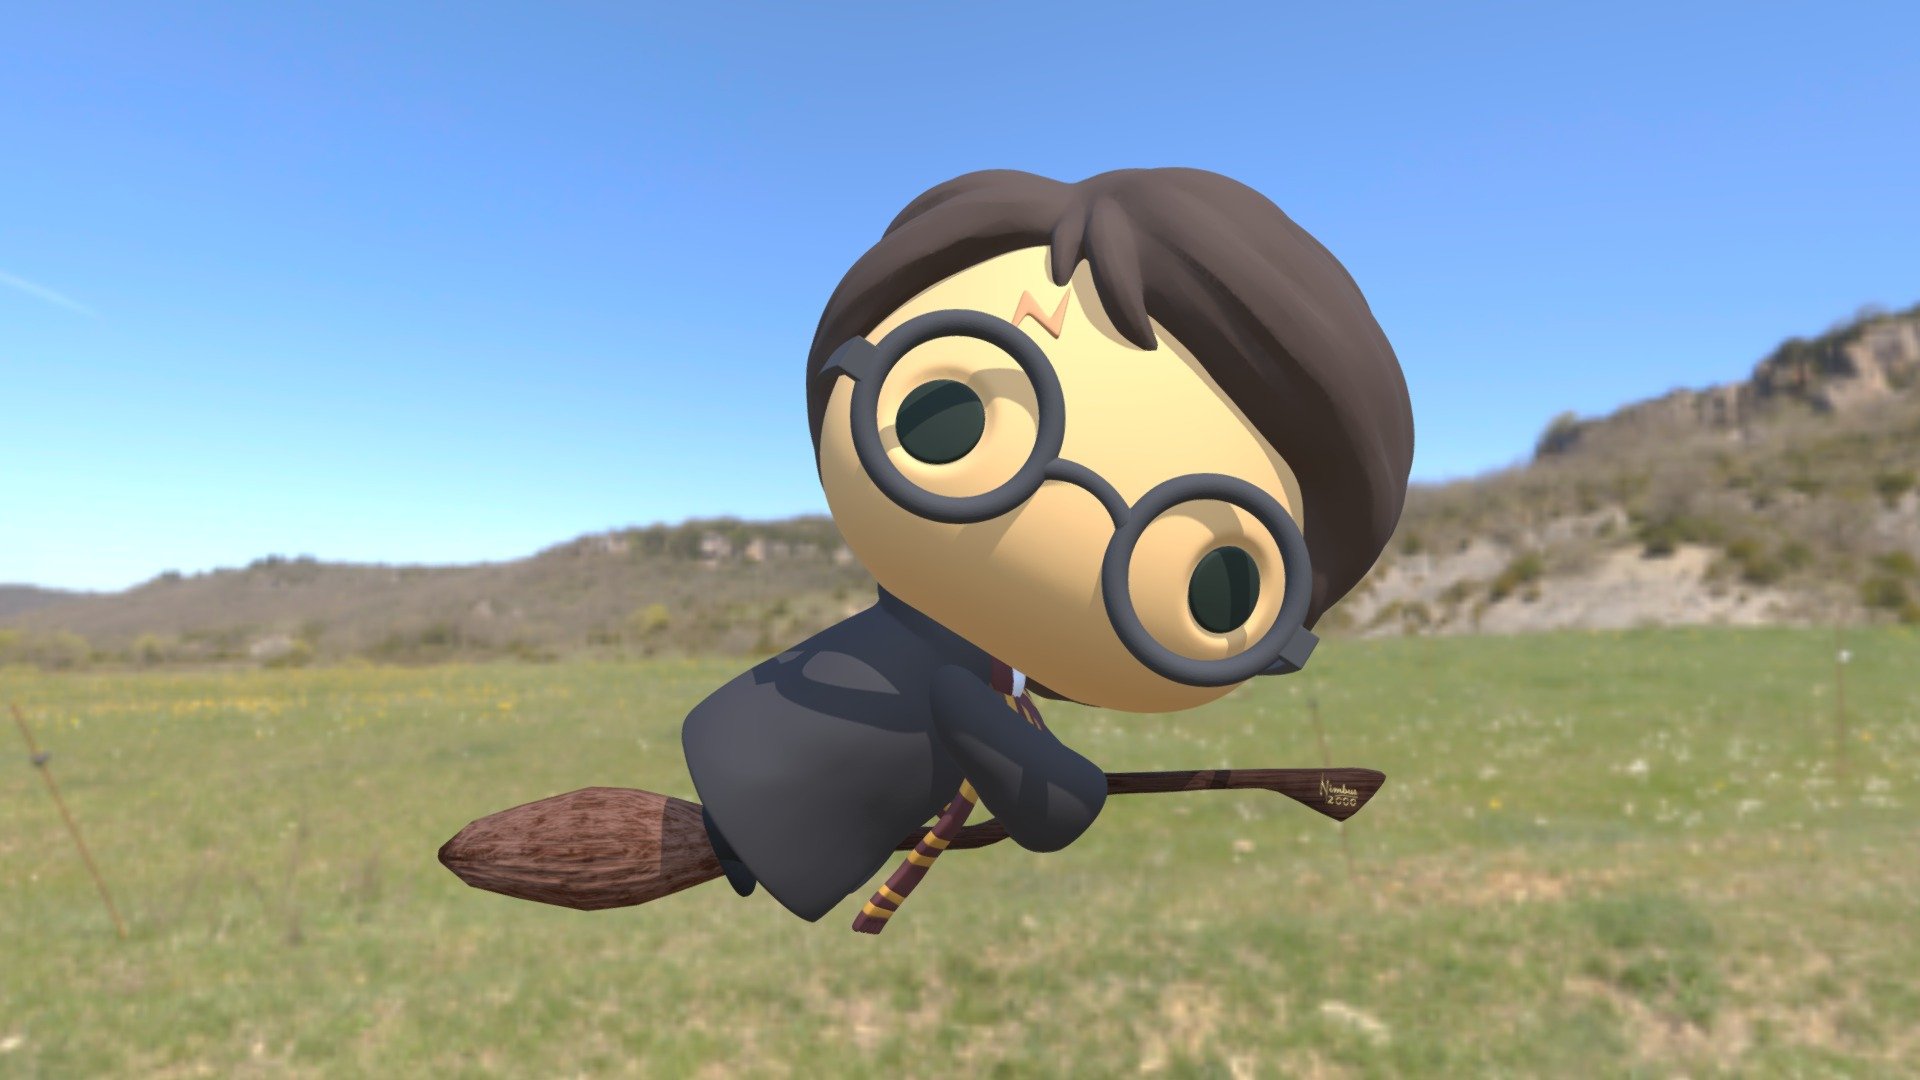 Harry Potter flying on his Nimbus 2000.
This is a Remix.

Harry Potter Model by purakito: https://www.thingiverse.com/thing:3200840

Nimbus2000 Model by Batuhan13: https://skfb.ly/6KSJT - Harry Potter Chibi - 3D model by adrianjg 3d model